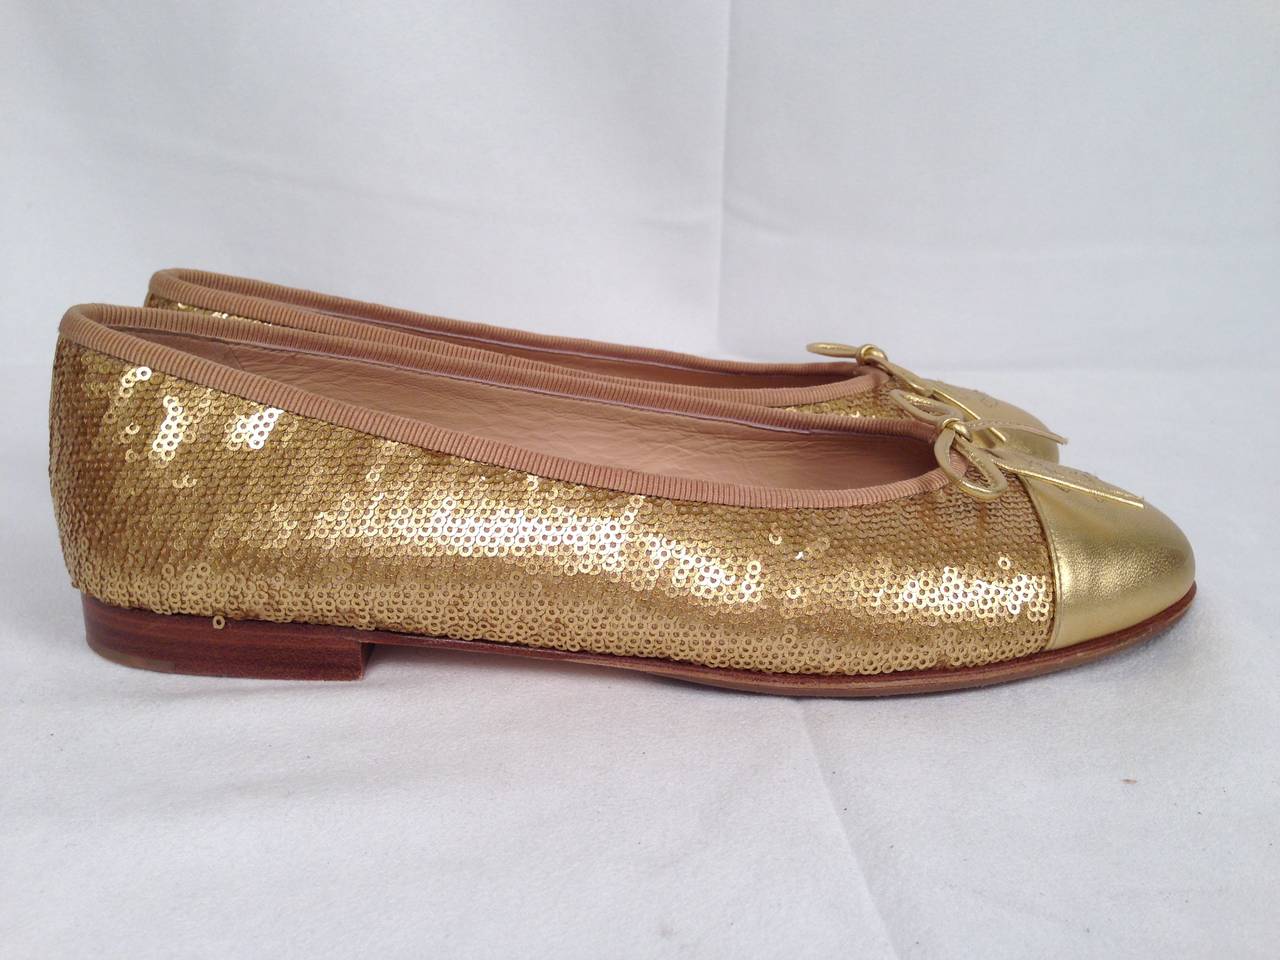 Chanel Leather and Gold Sequin Ballerina Flats With Metallic Gold Cap Toe In Excellent Condition For Sale In Palm Beach, FL